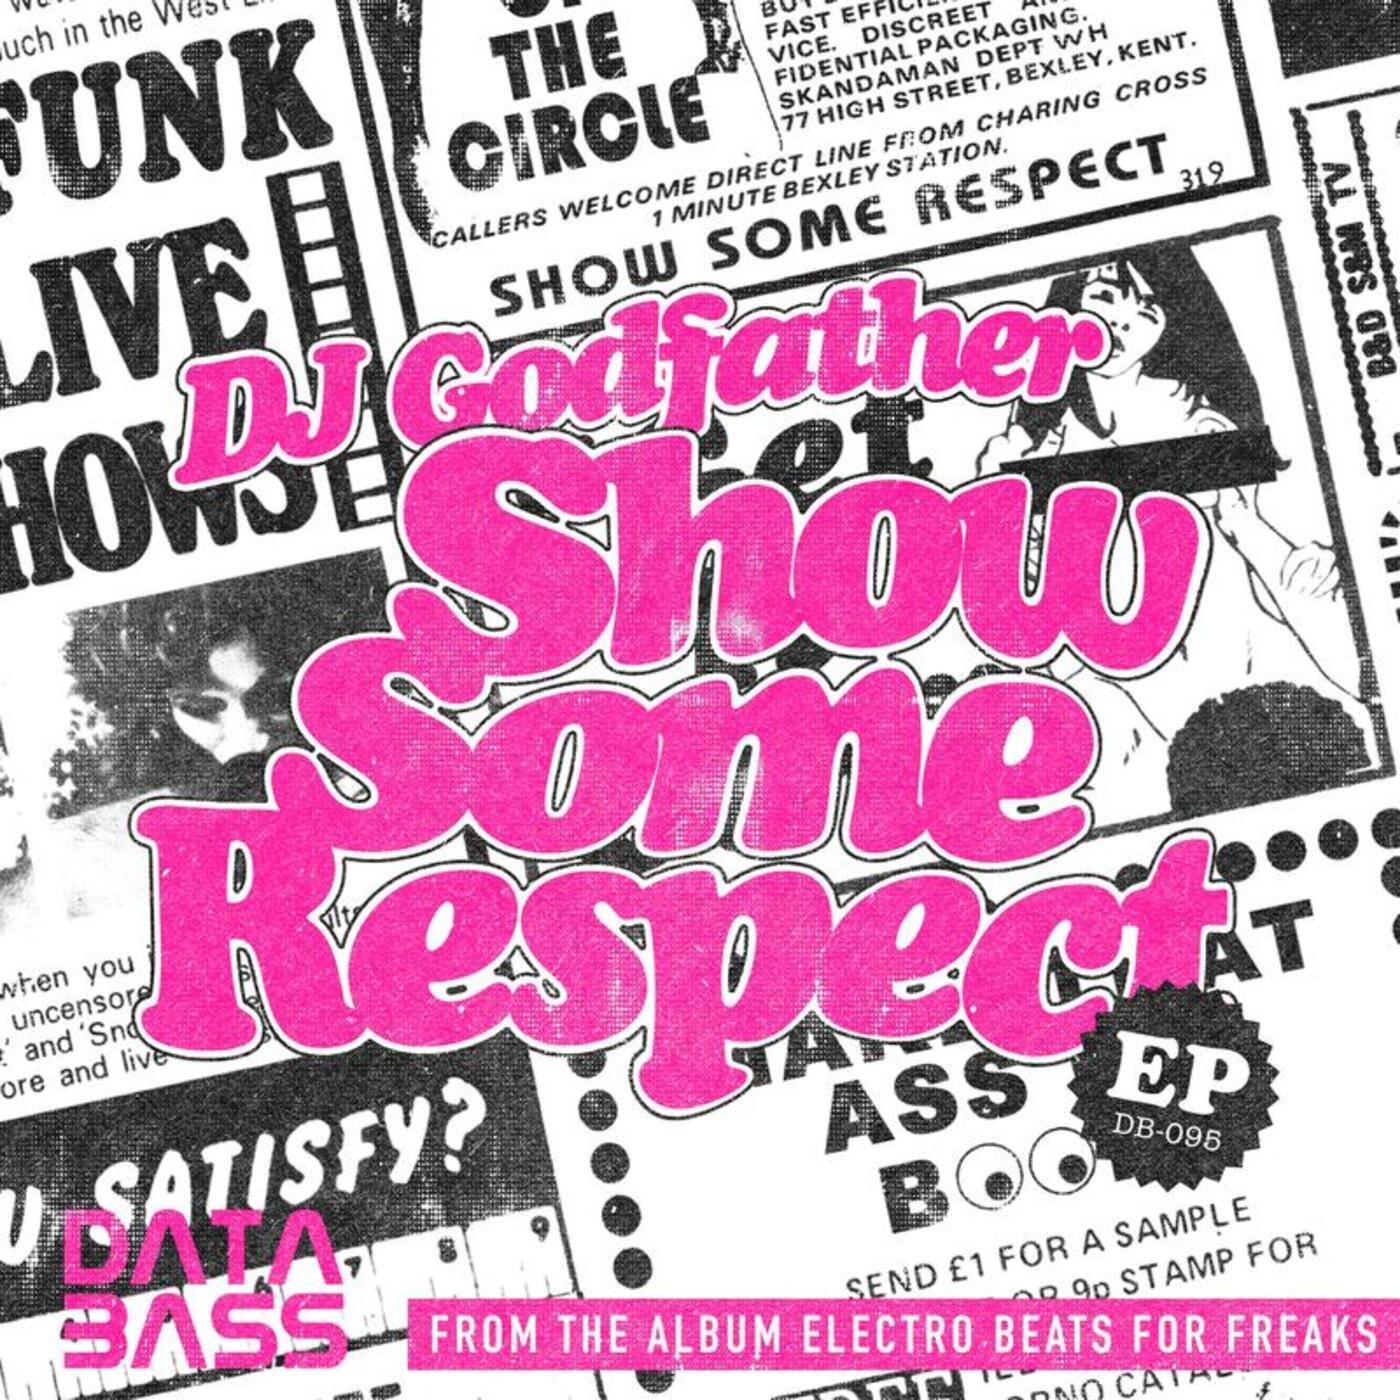 Show Some Respect EP